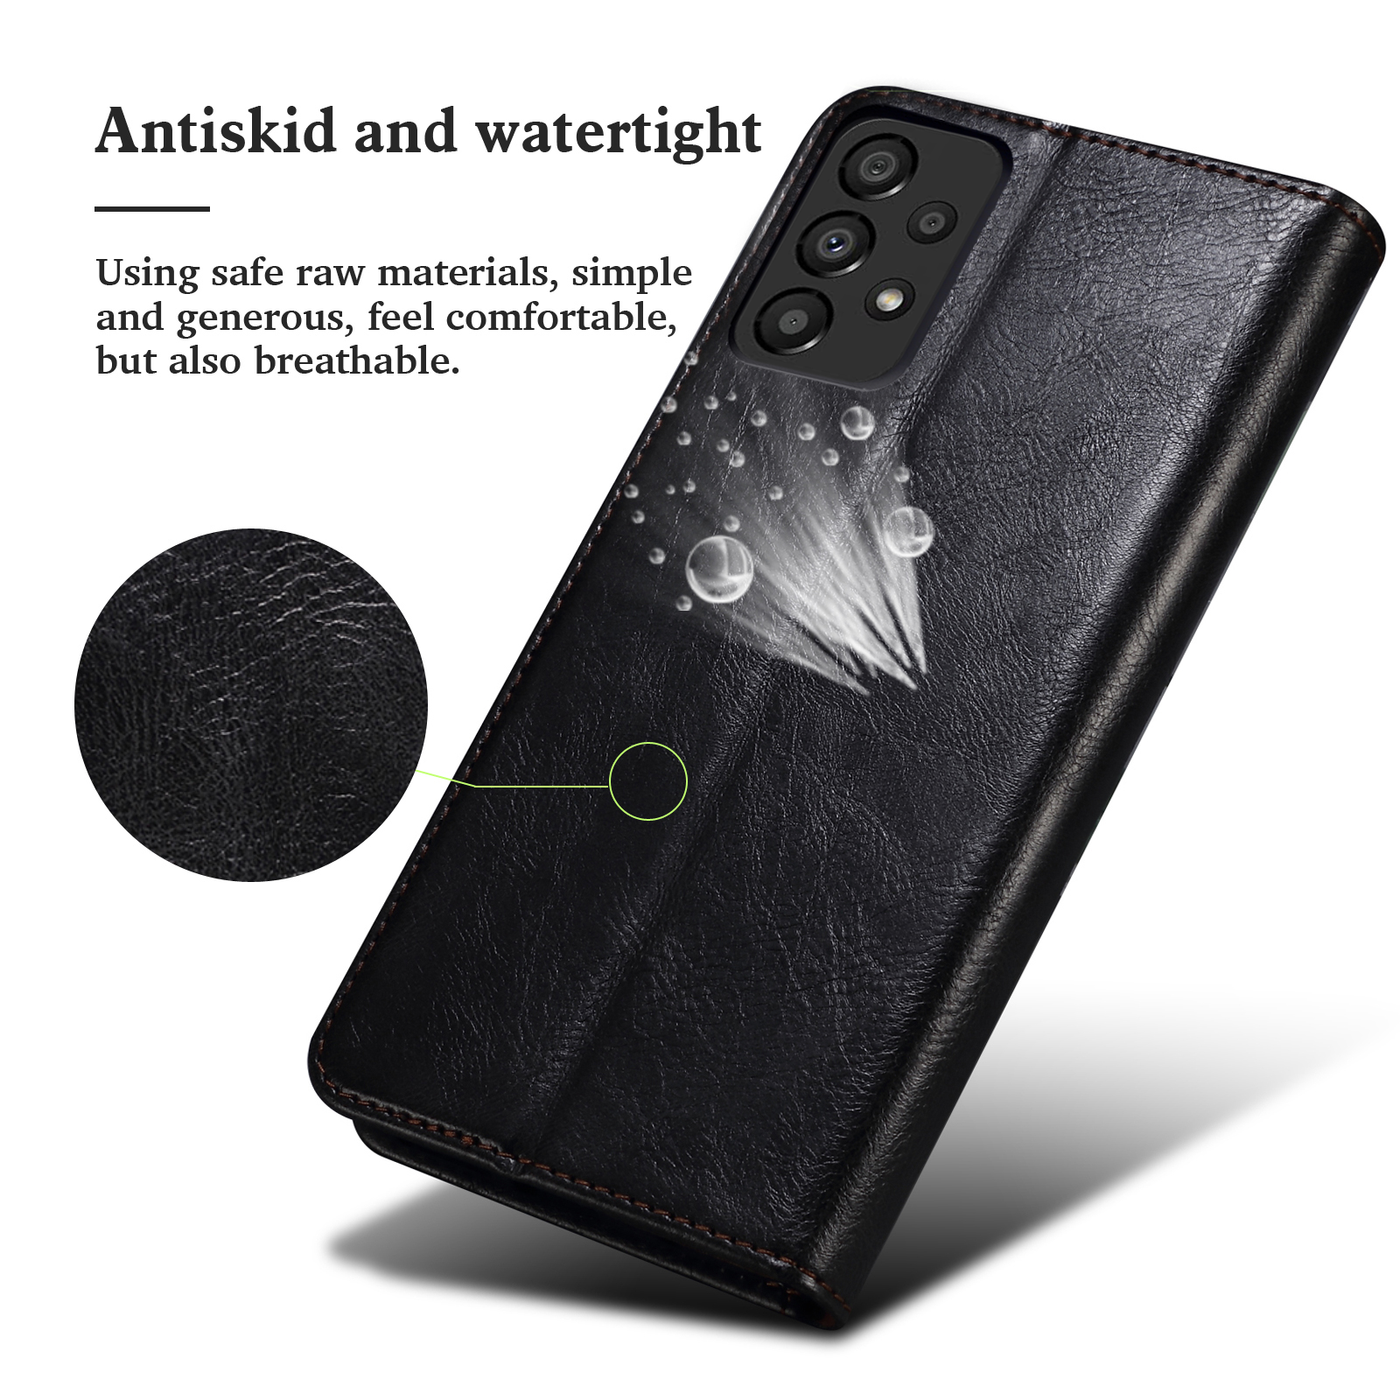 Excelsior Premium Vintage PU Leather Wallet flip Cover Case For Samsung Galaxy A73 5G